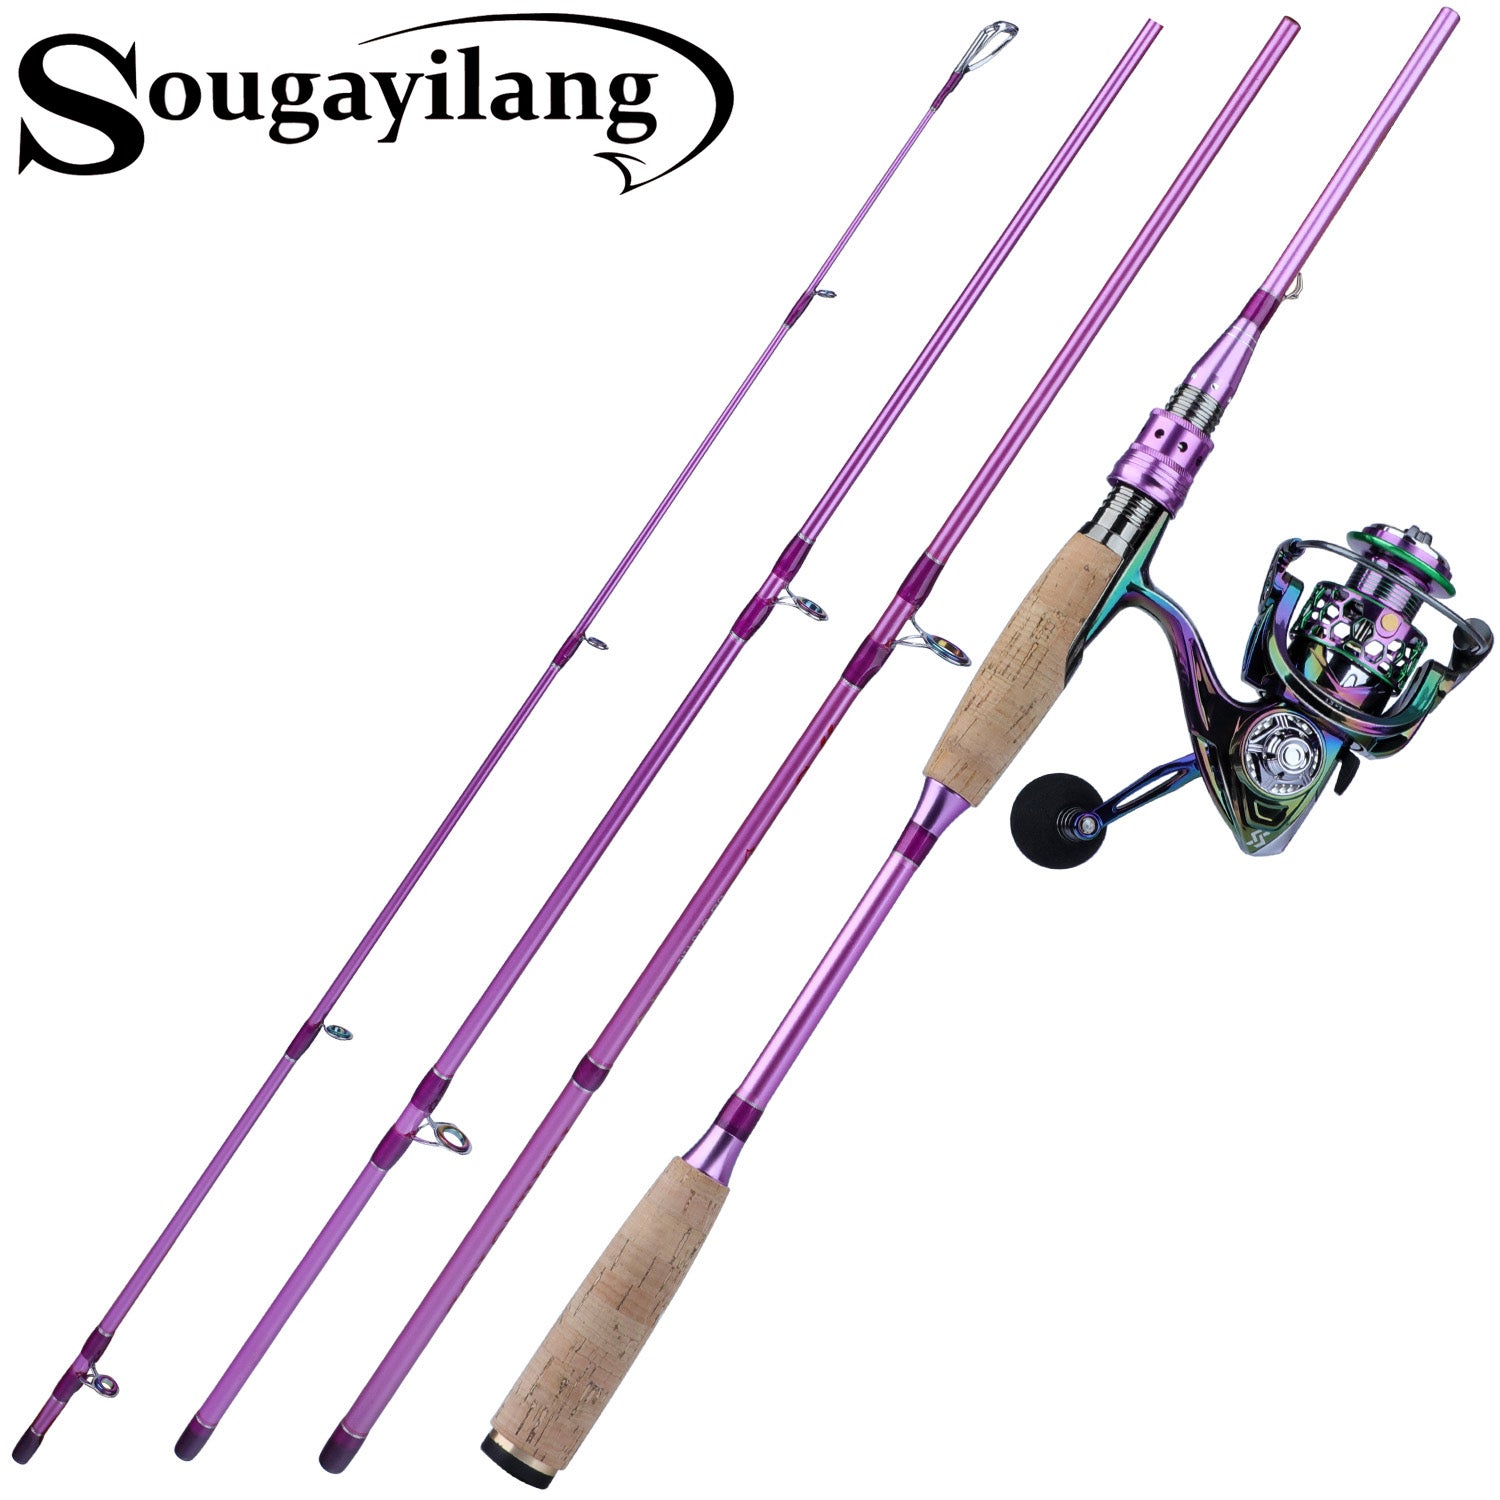 Sougayilang Fishing Rod Reel Combo，Carbon Fiber Protable Casting Spinning & Fishing  Pole and Colorful Casting & Spinning Reel for Travel 4 Pieces  Freshwater-6.9 FT Rod + Left Hand Casting Reel : 